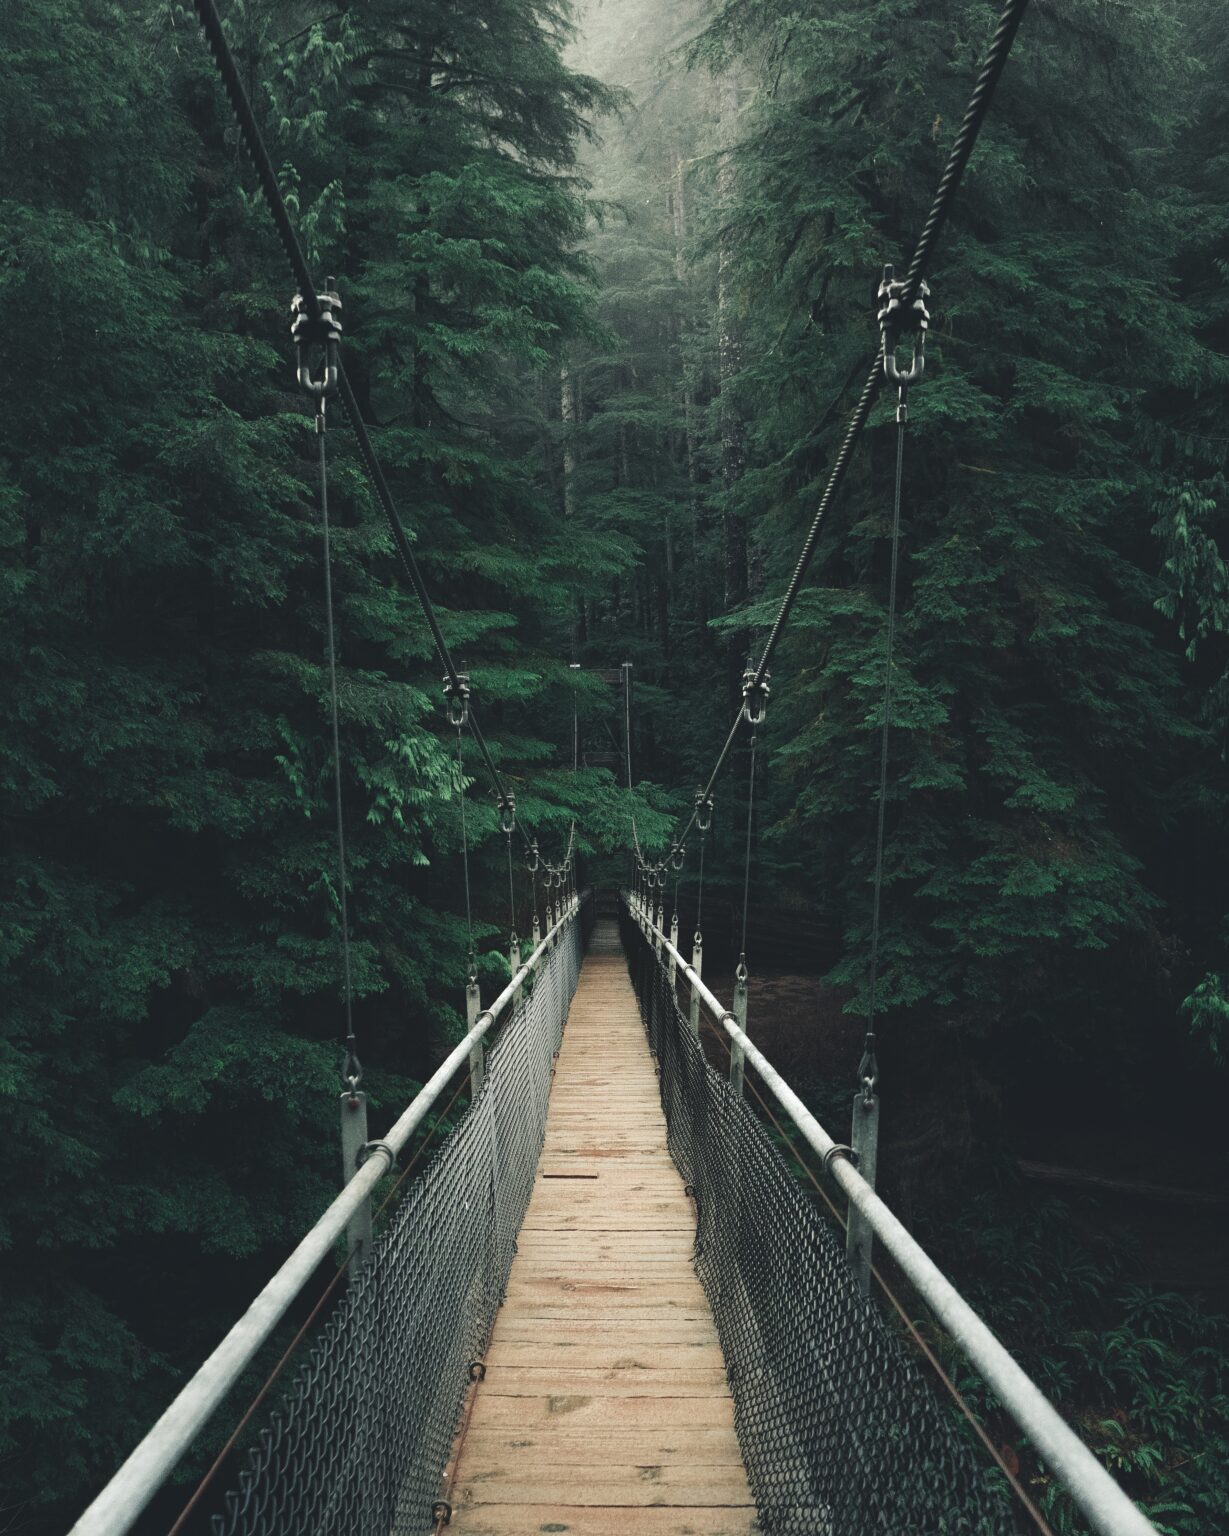 A point of view shot of a narrow suspension bridge in a thick beautiful forest